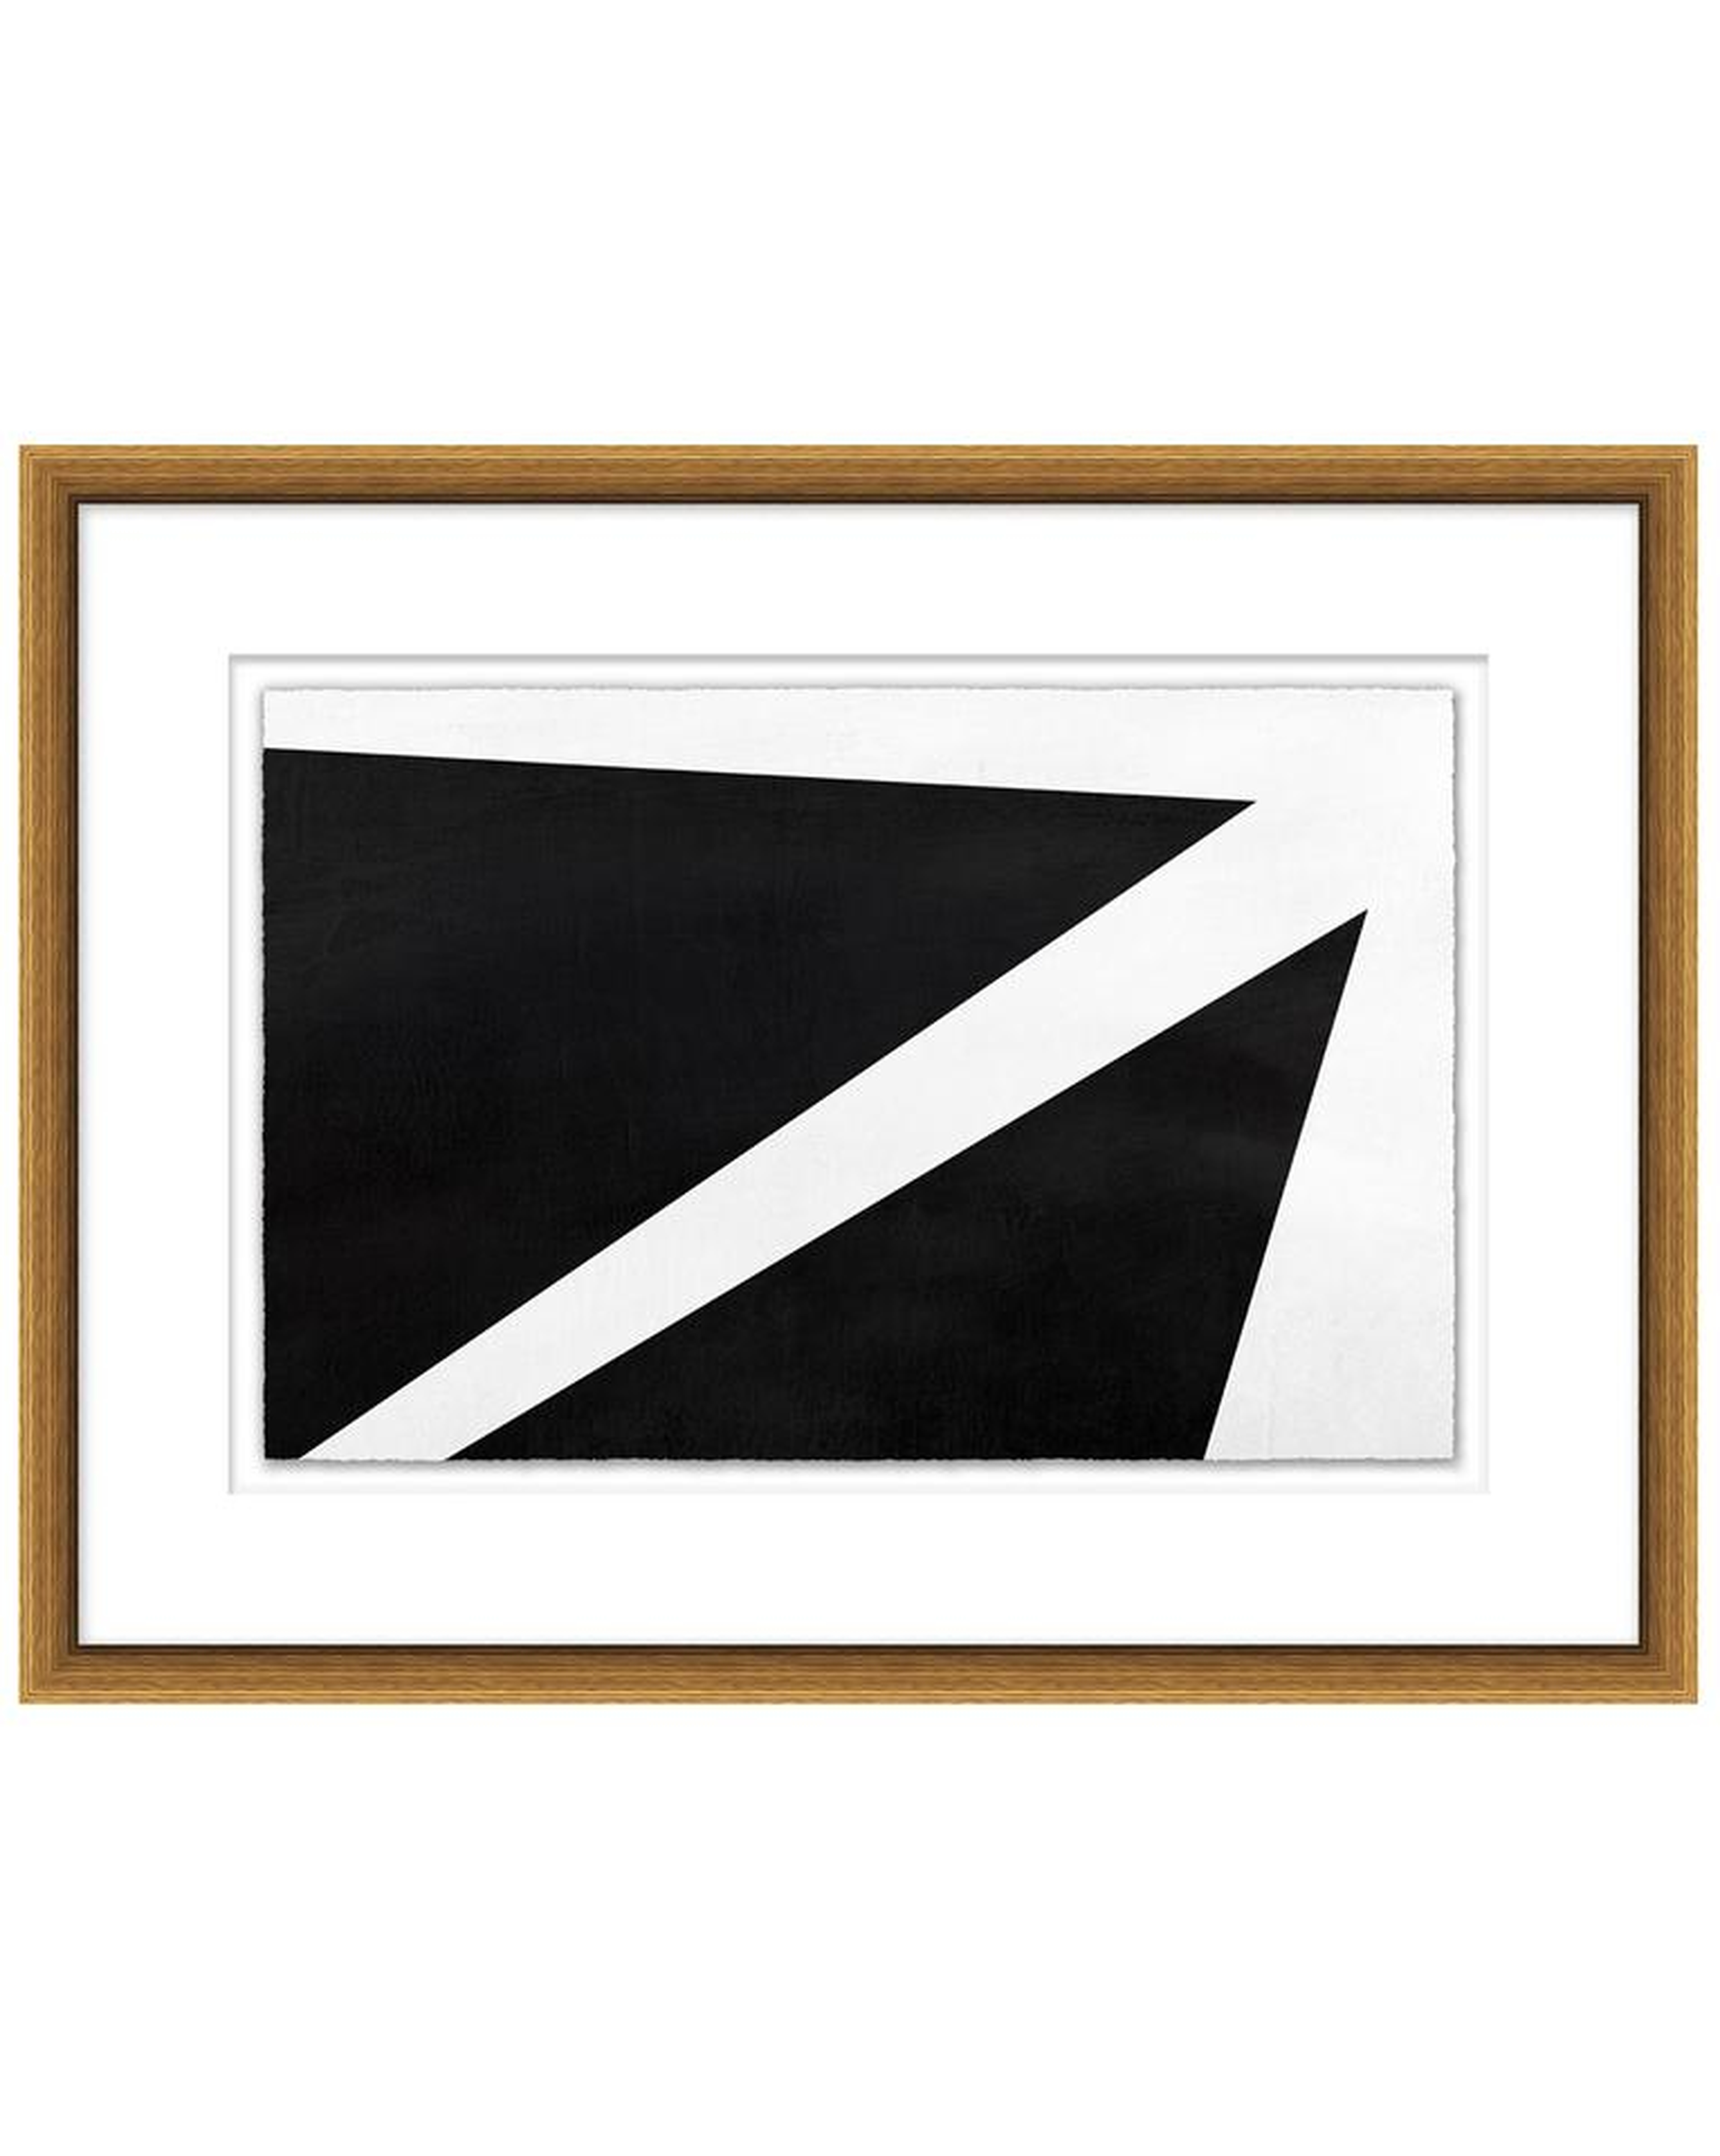 MID CENTURY SHAPES 3 Framed Art - McGee & Co.